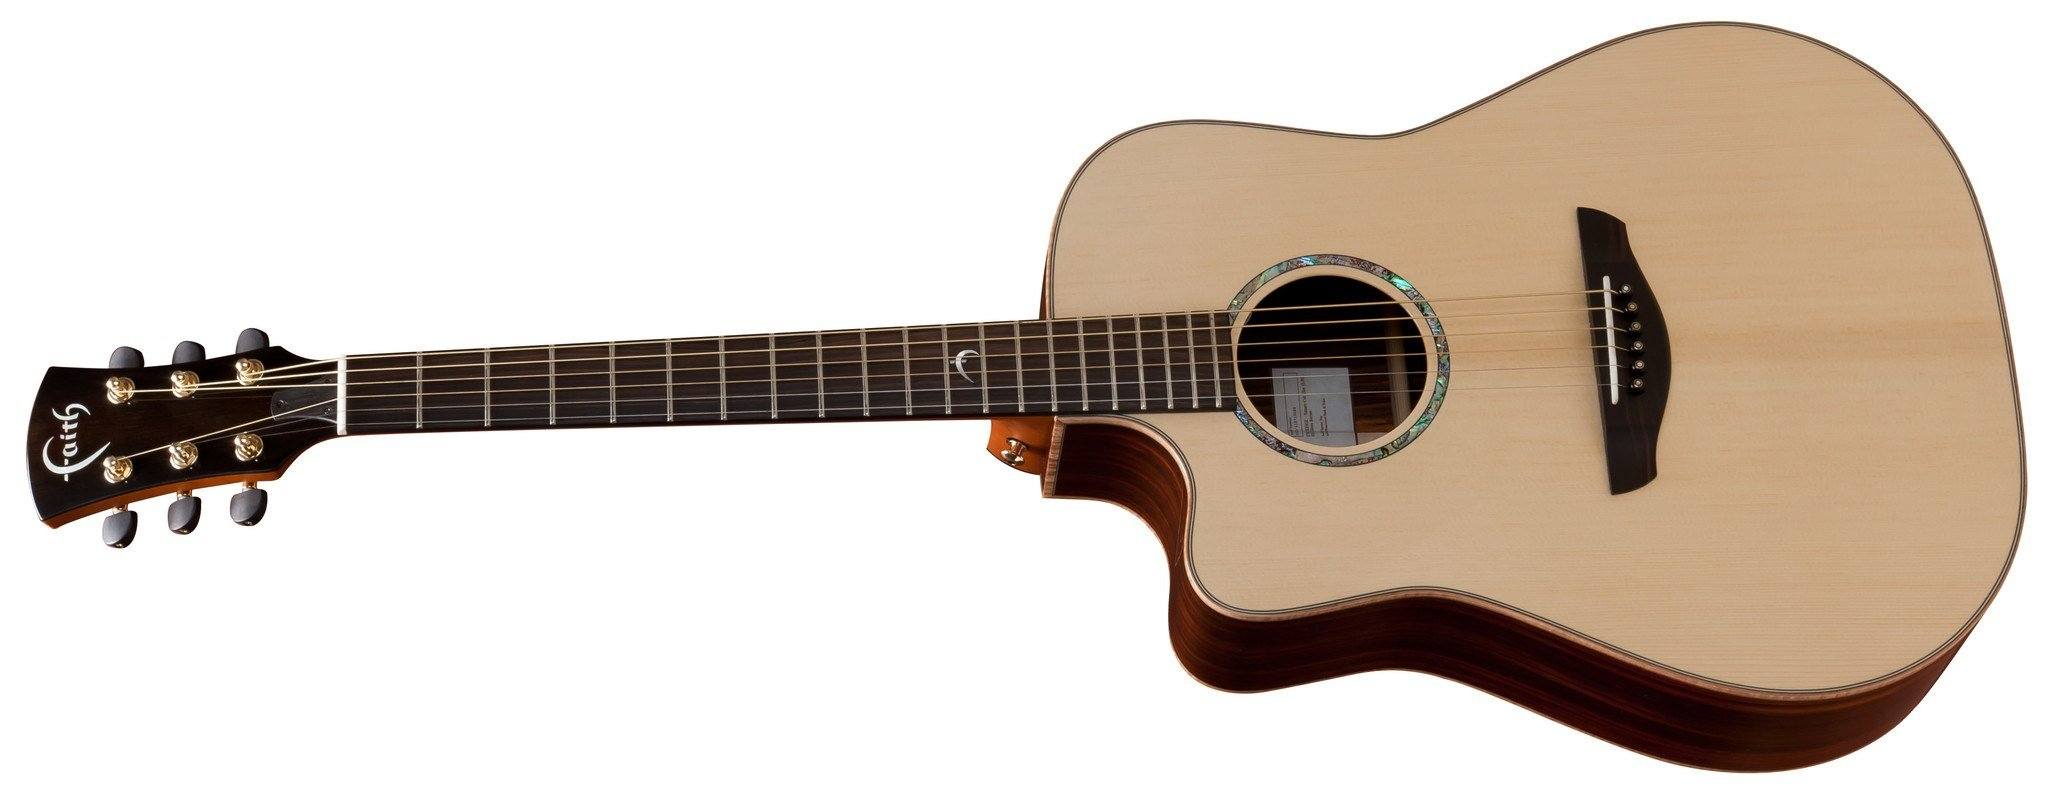 Faith FSCEHGL HiGloss Saturn Electro Cutaway Lefthanded, Electro Acoustic Guitar for sale at Richards Guitars.